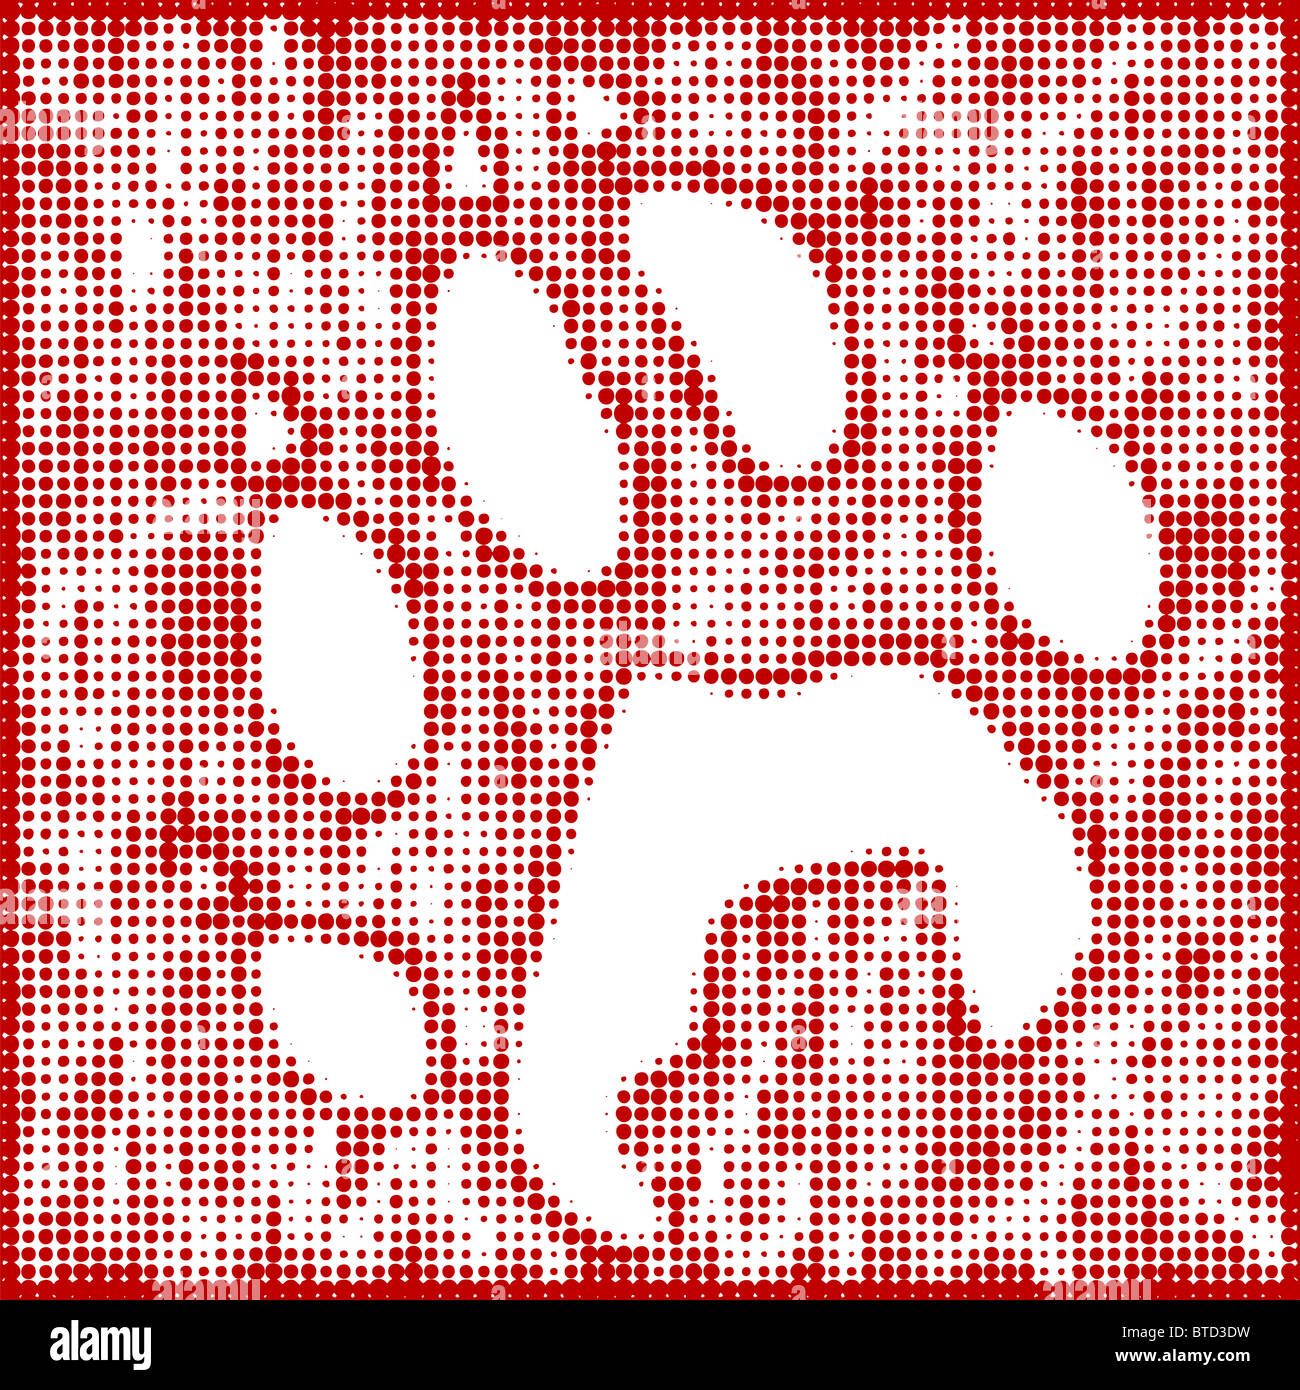 Red Wolf Paw Print